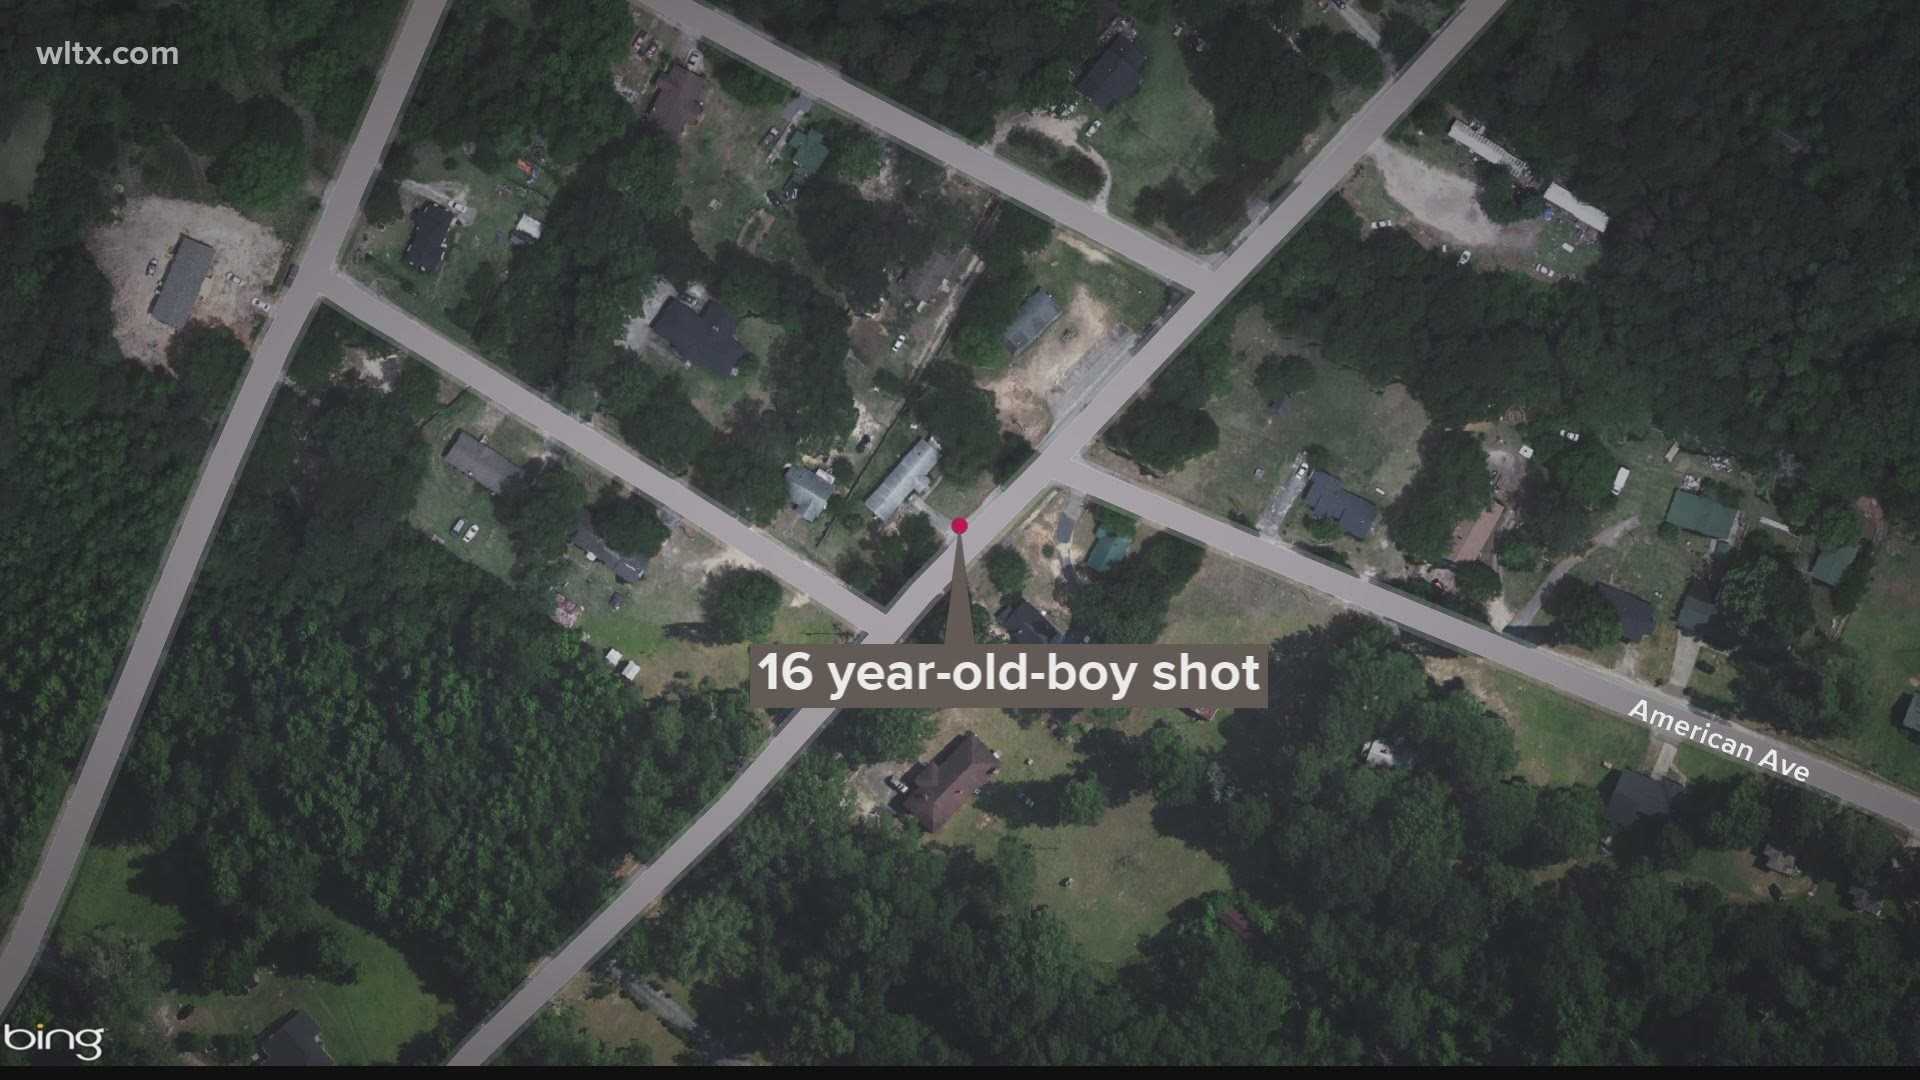 The Richland County Sheriff’s Department is investigating a deadly shooting that resulted in the death of a 16-year-old.